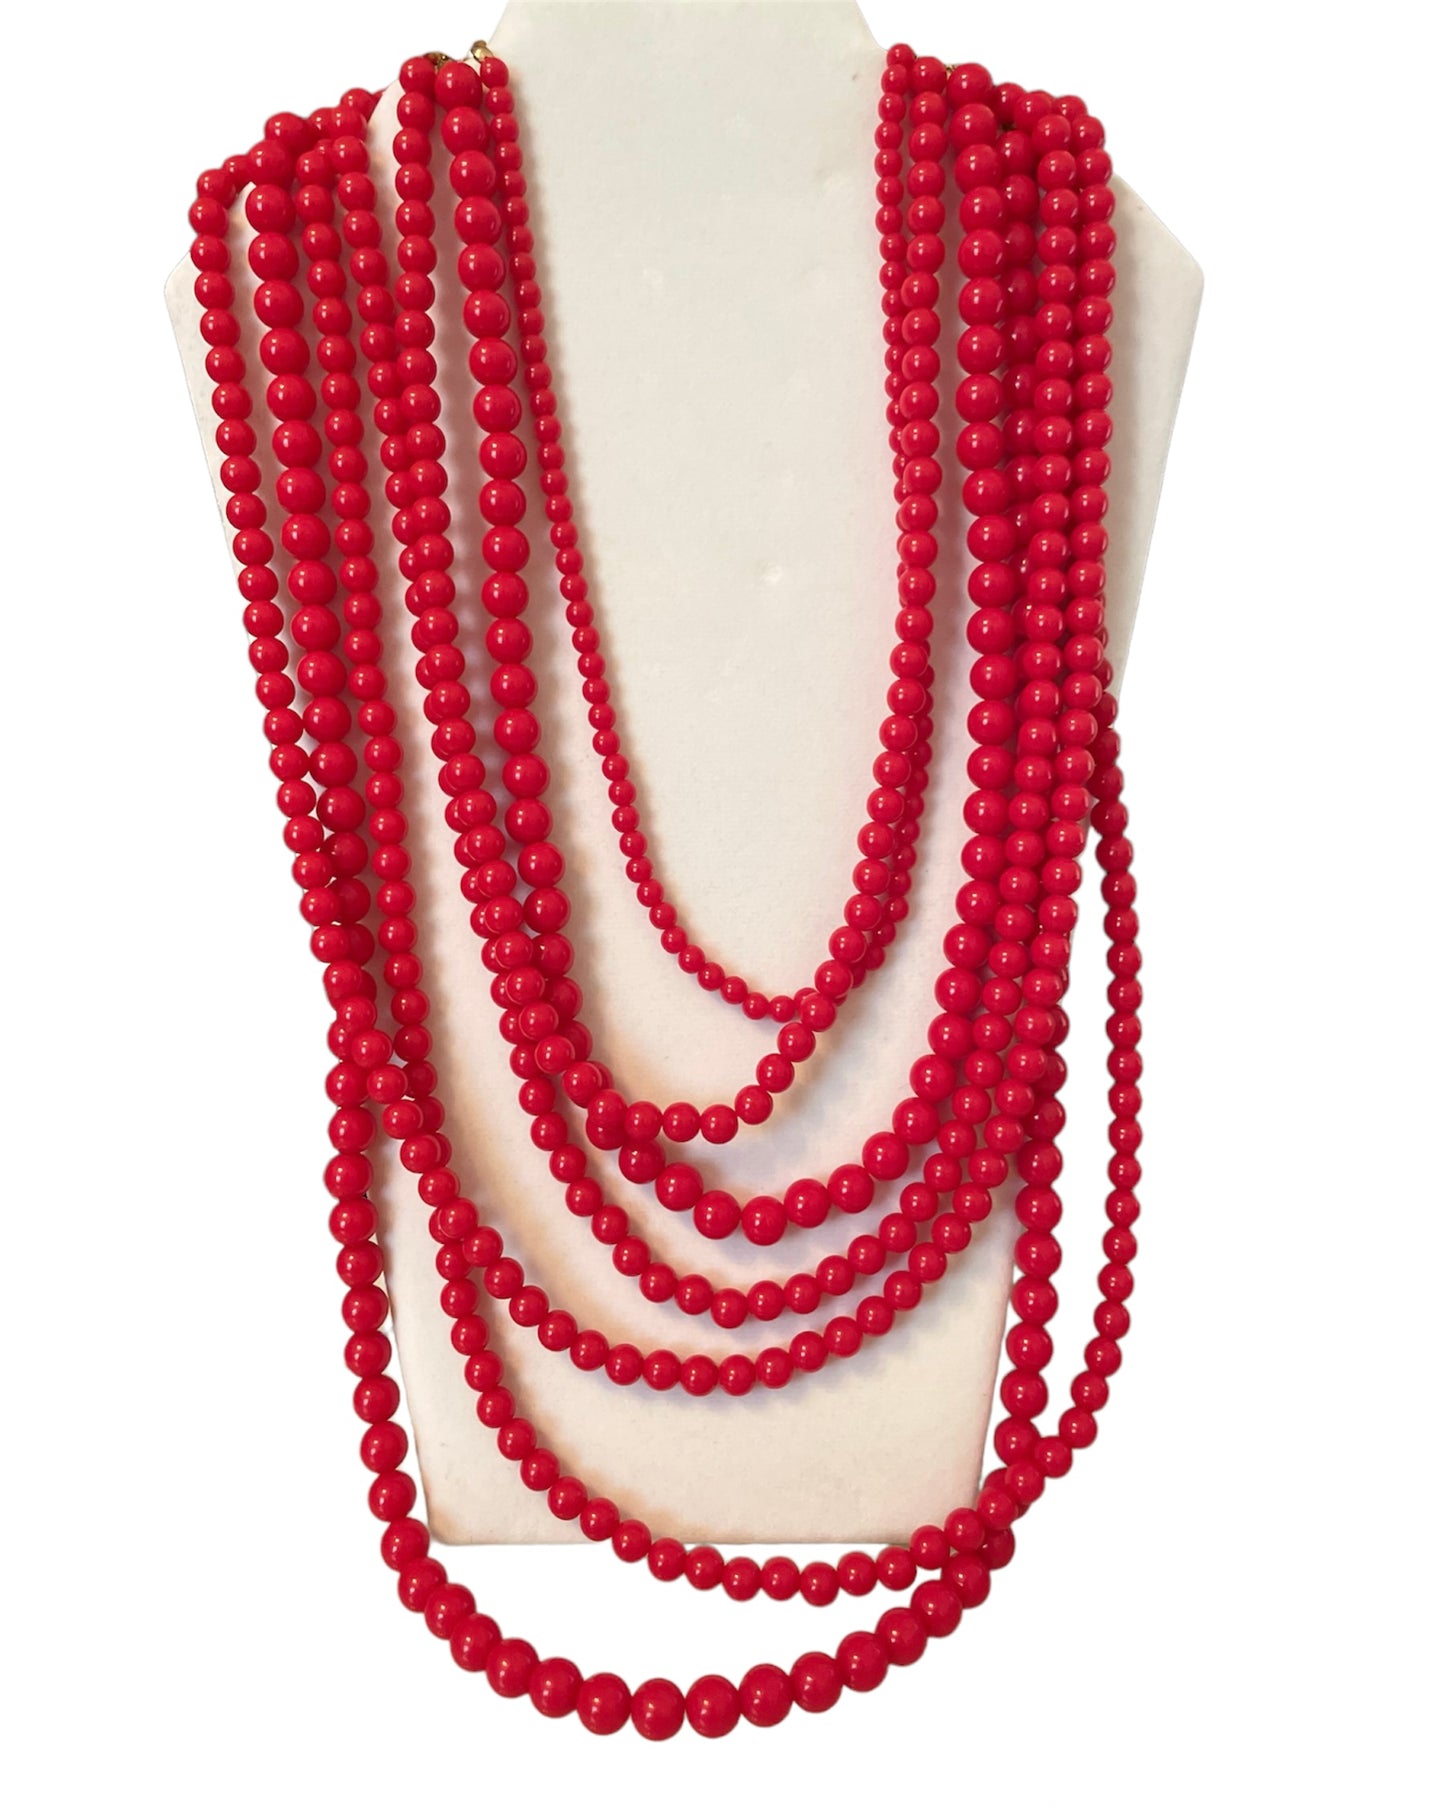 Multilayer Acrylic Red Necklace & Earrings Set